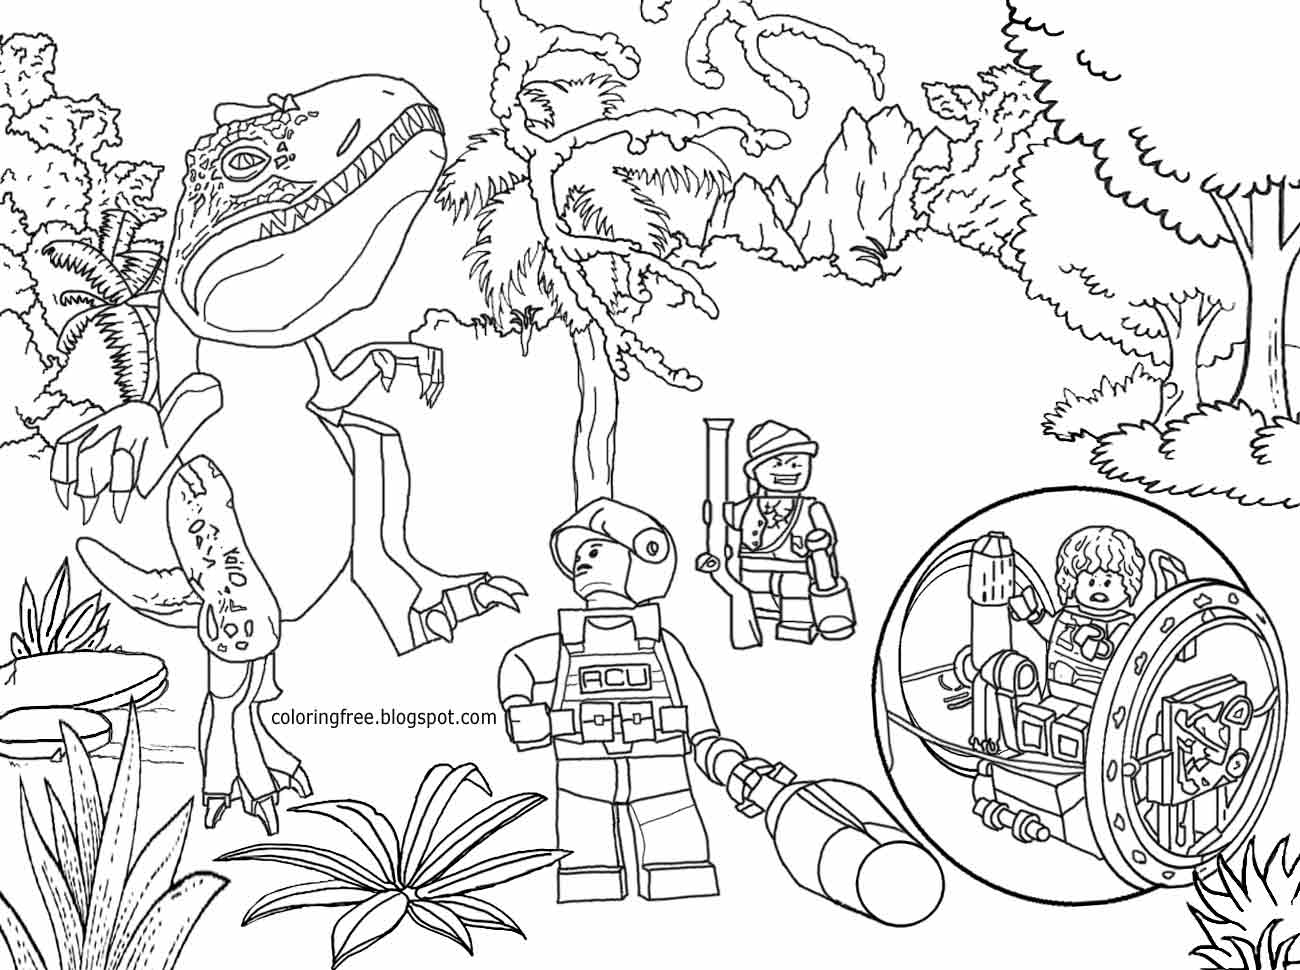 Free Coloring Pages Printable Pictures To Color Kids Drawing ideas:  Prehistoric Jurassic World Dinosaurs Park Science Fiction Coloring Pages